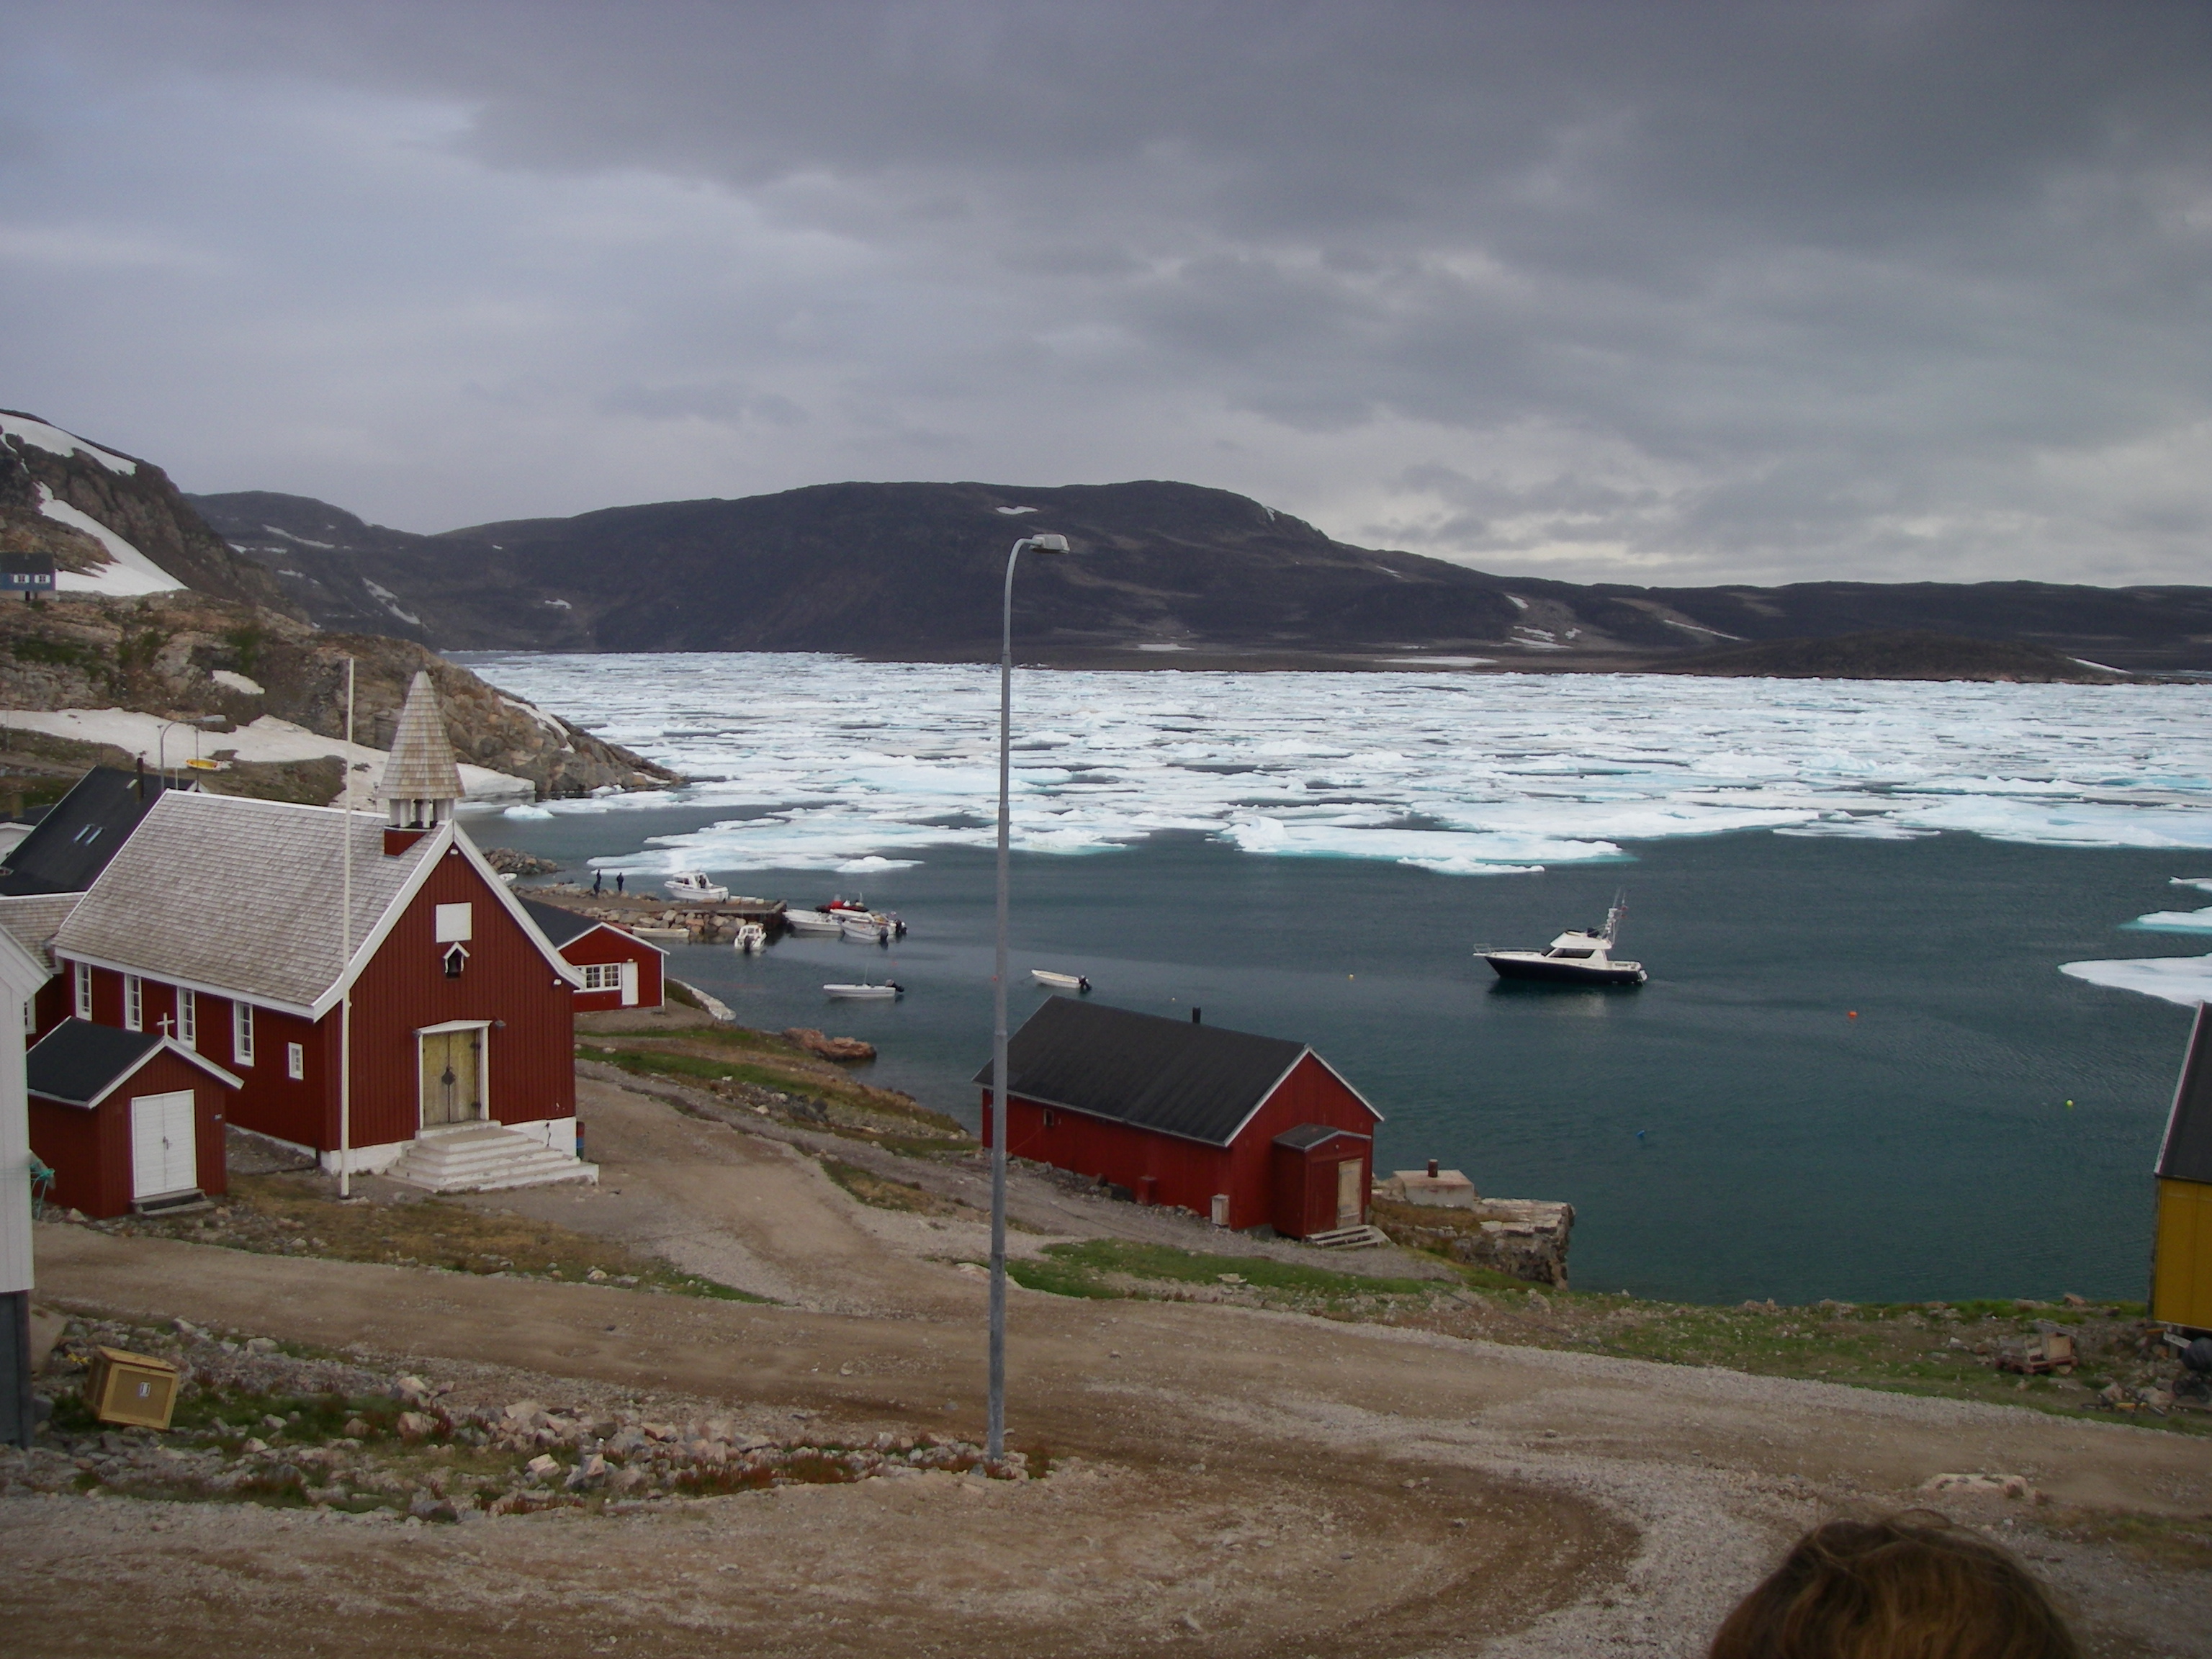 The community church is found adjacent to the bay at Ittoqqortoormiit, Greenland.